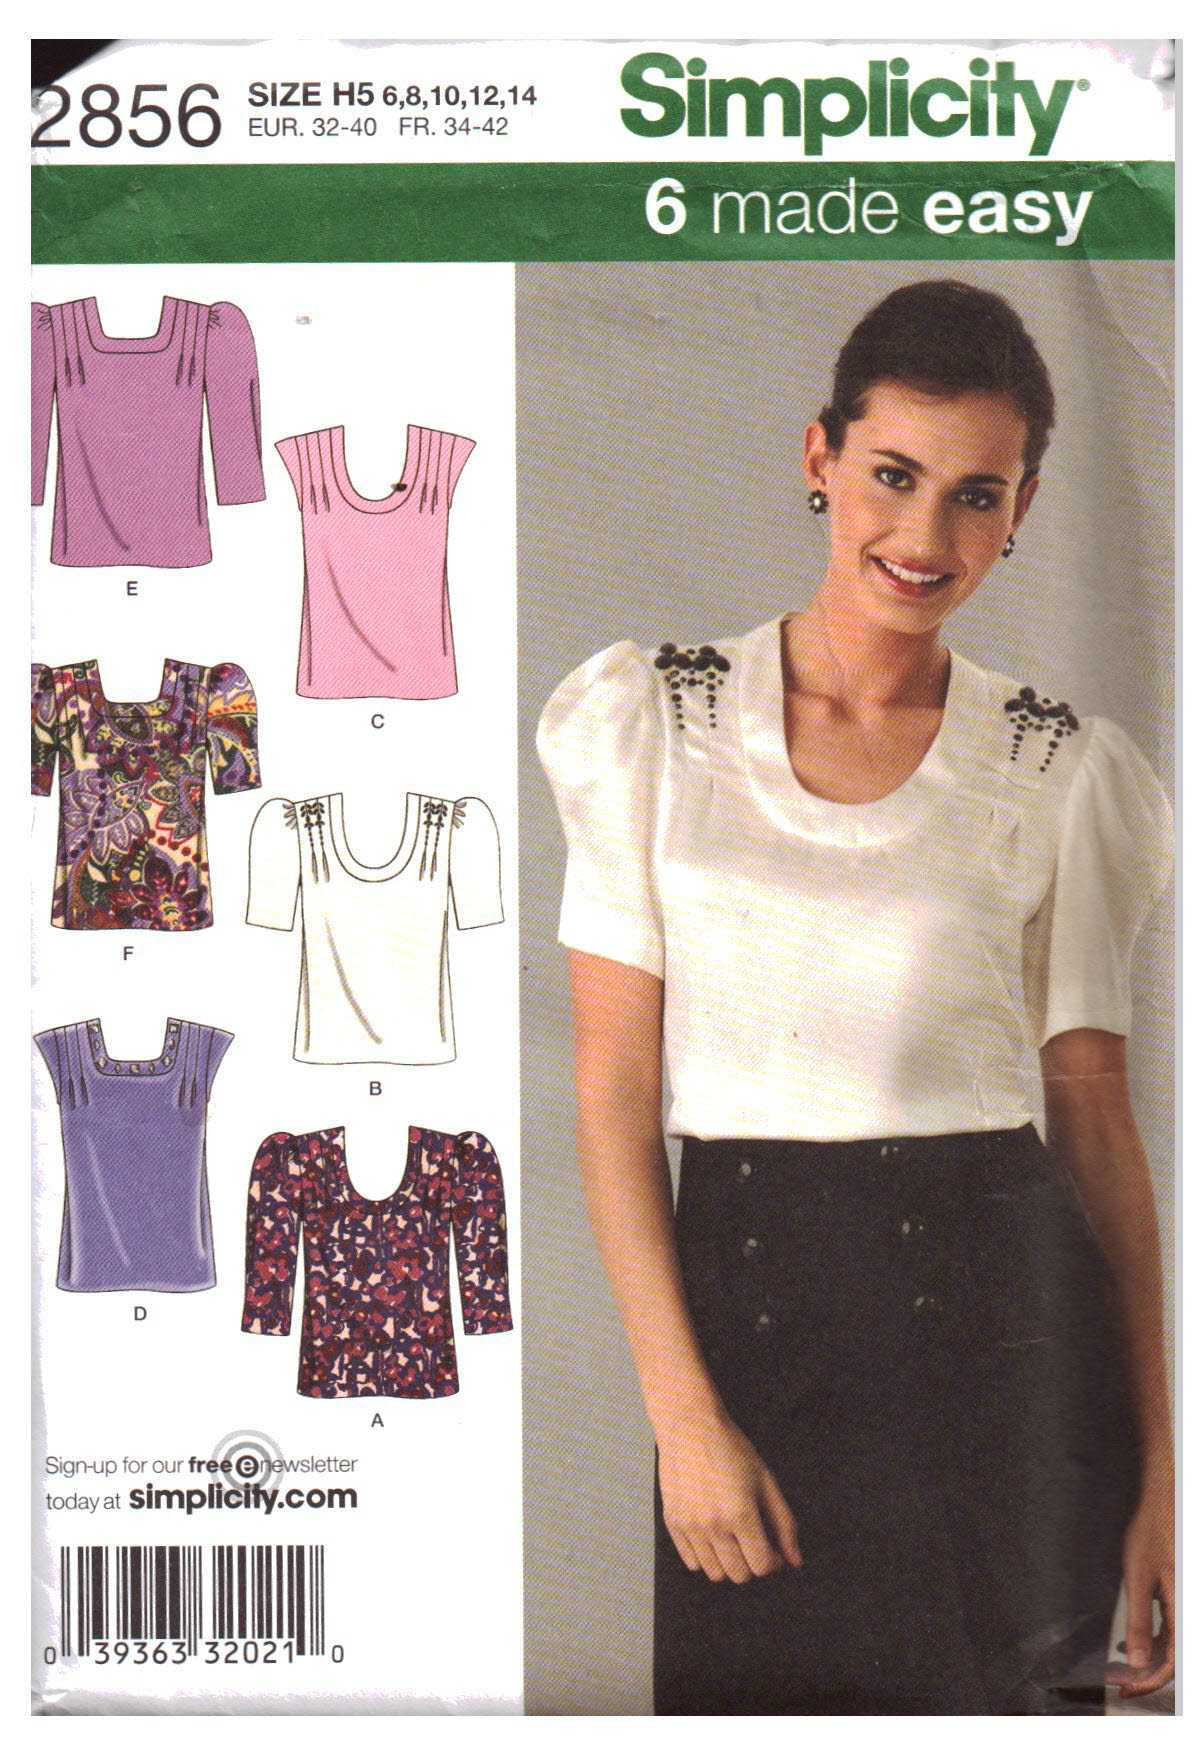 Simplicity 2856 Top with neckline, Sleeve variations Size: H5 6-8-10-12 ...